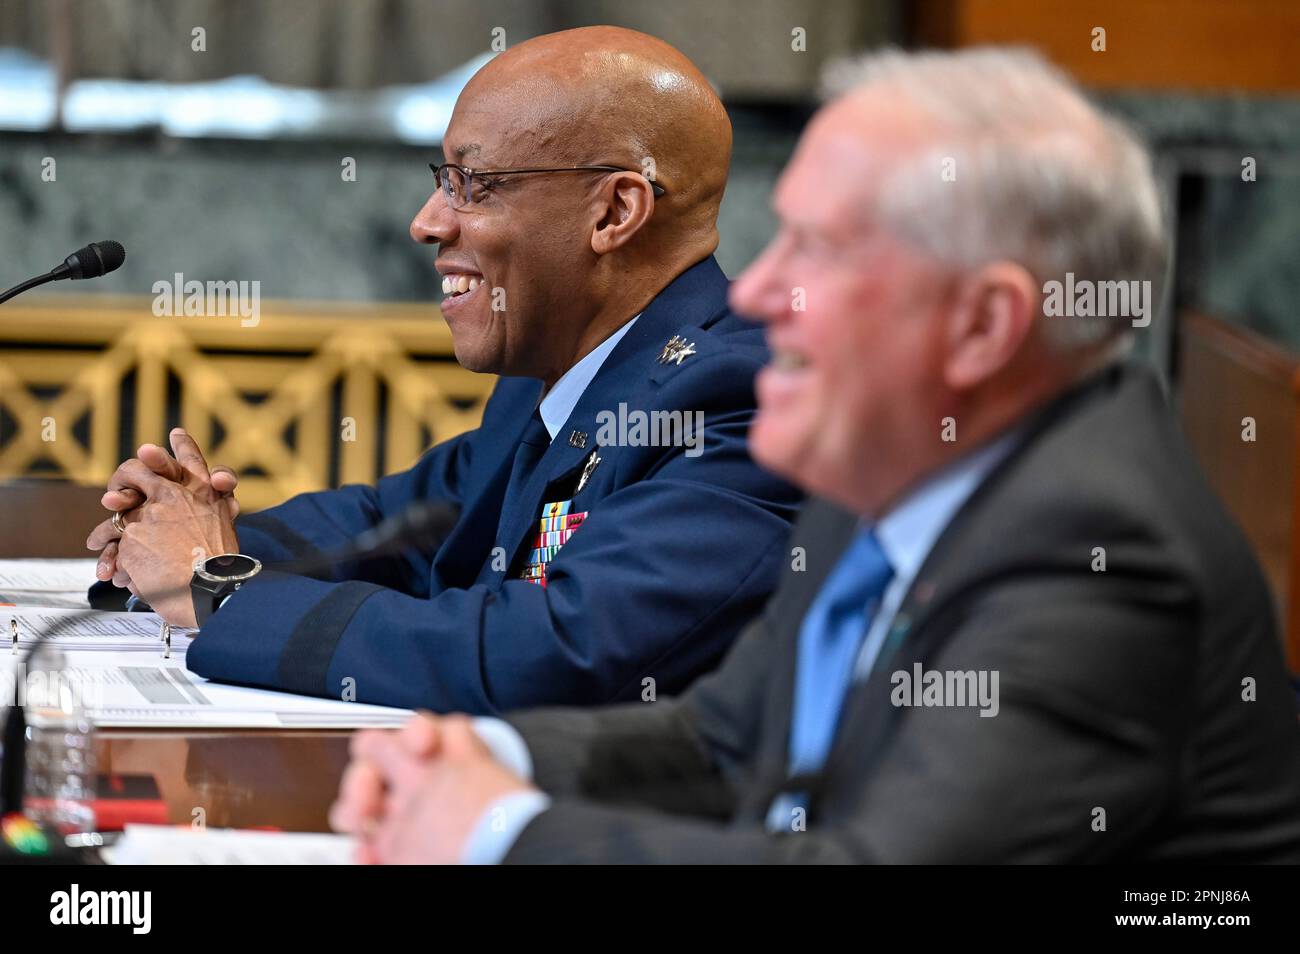 Washington, United States Of America. 18th Apr, 2023. Washington, United States of America. 18 April, 2023. U.S. Air Force Chief of Staff Gen. CQ Brown, Jr., testifies before the Senate Appropriations Subcommittee on Defense hearing on the Air Force fiscal year 2024 budget on Capitol Hill, April 18, 2023 in Washington, DC Credit: Eric Dietrich/Department of Defense/Alamy Live News Stock Photo